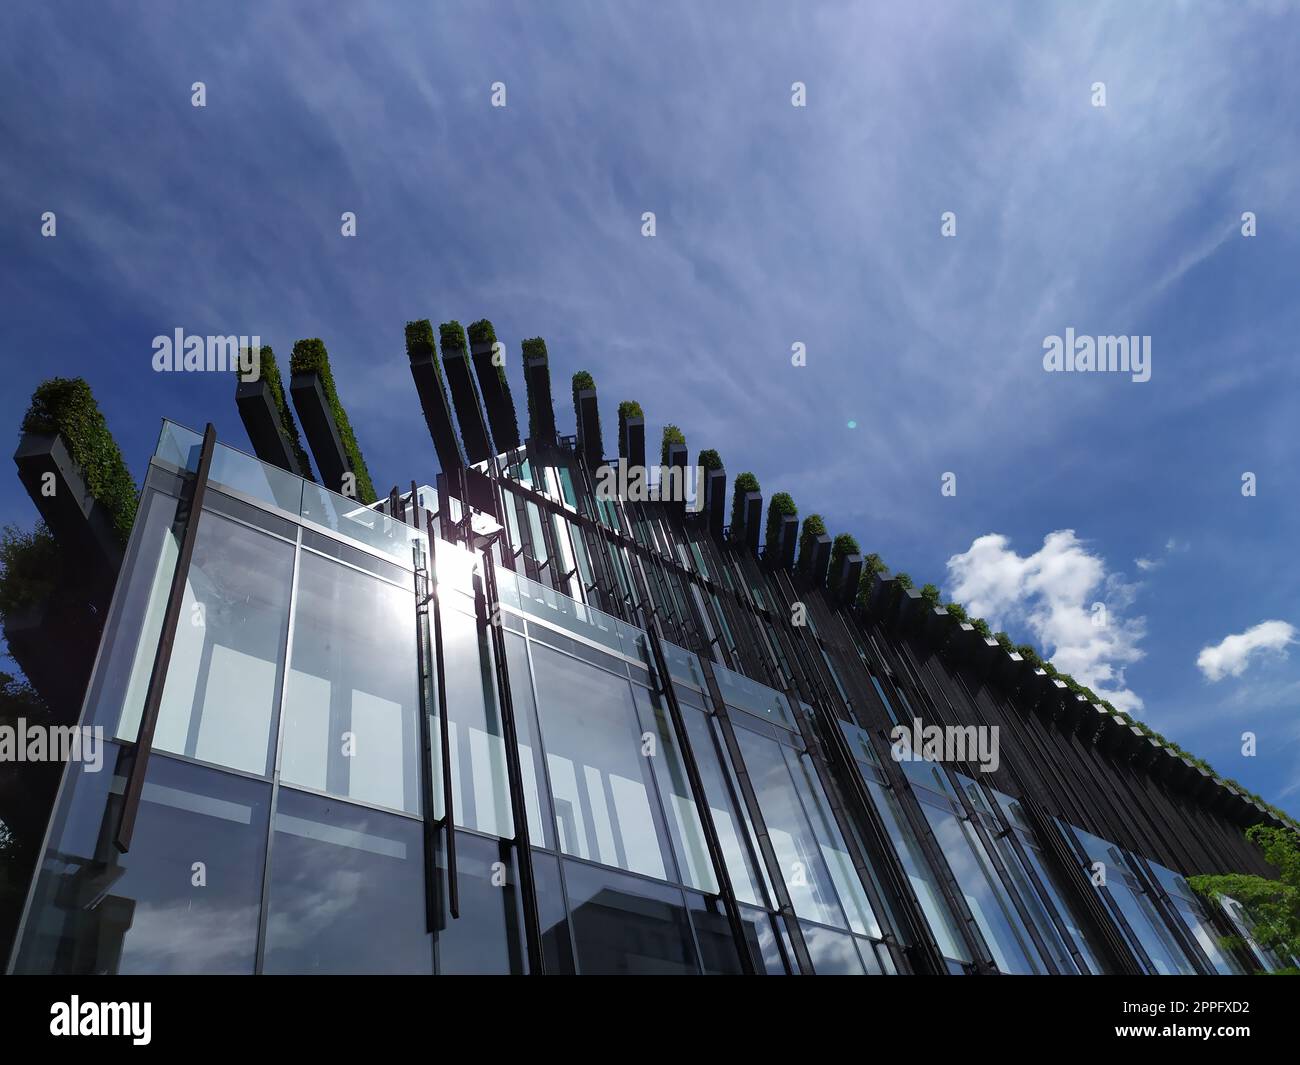 Dusseldorf, Germany - July 16th, 2022: Modern architecture of the DÃ¼sseldorfer KÃ¶bogen in summer shows attractive and extravagant glass facade of organic and curvy shopping mall with blue sky clouds Stock Photo